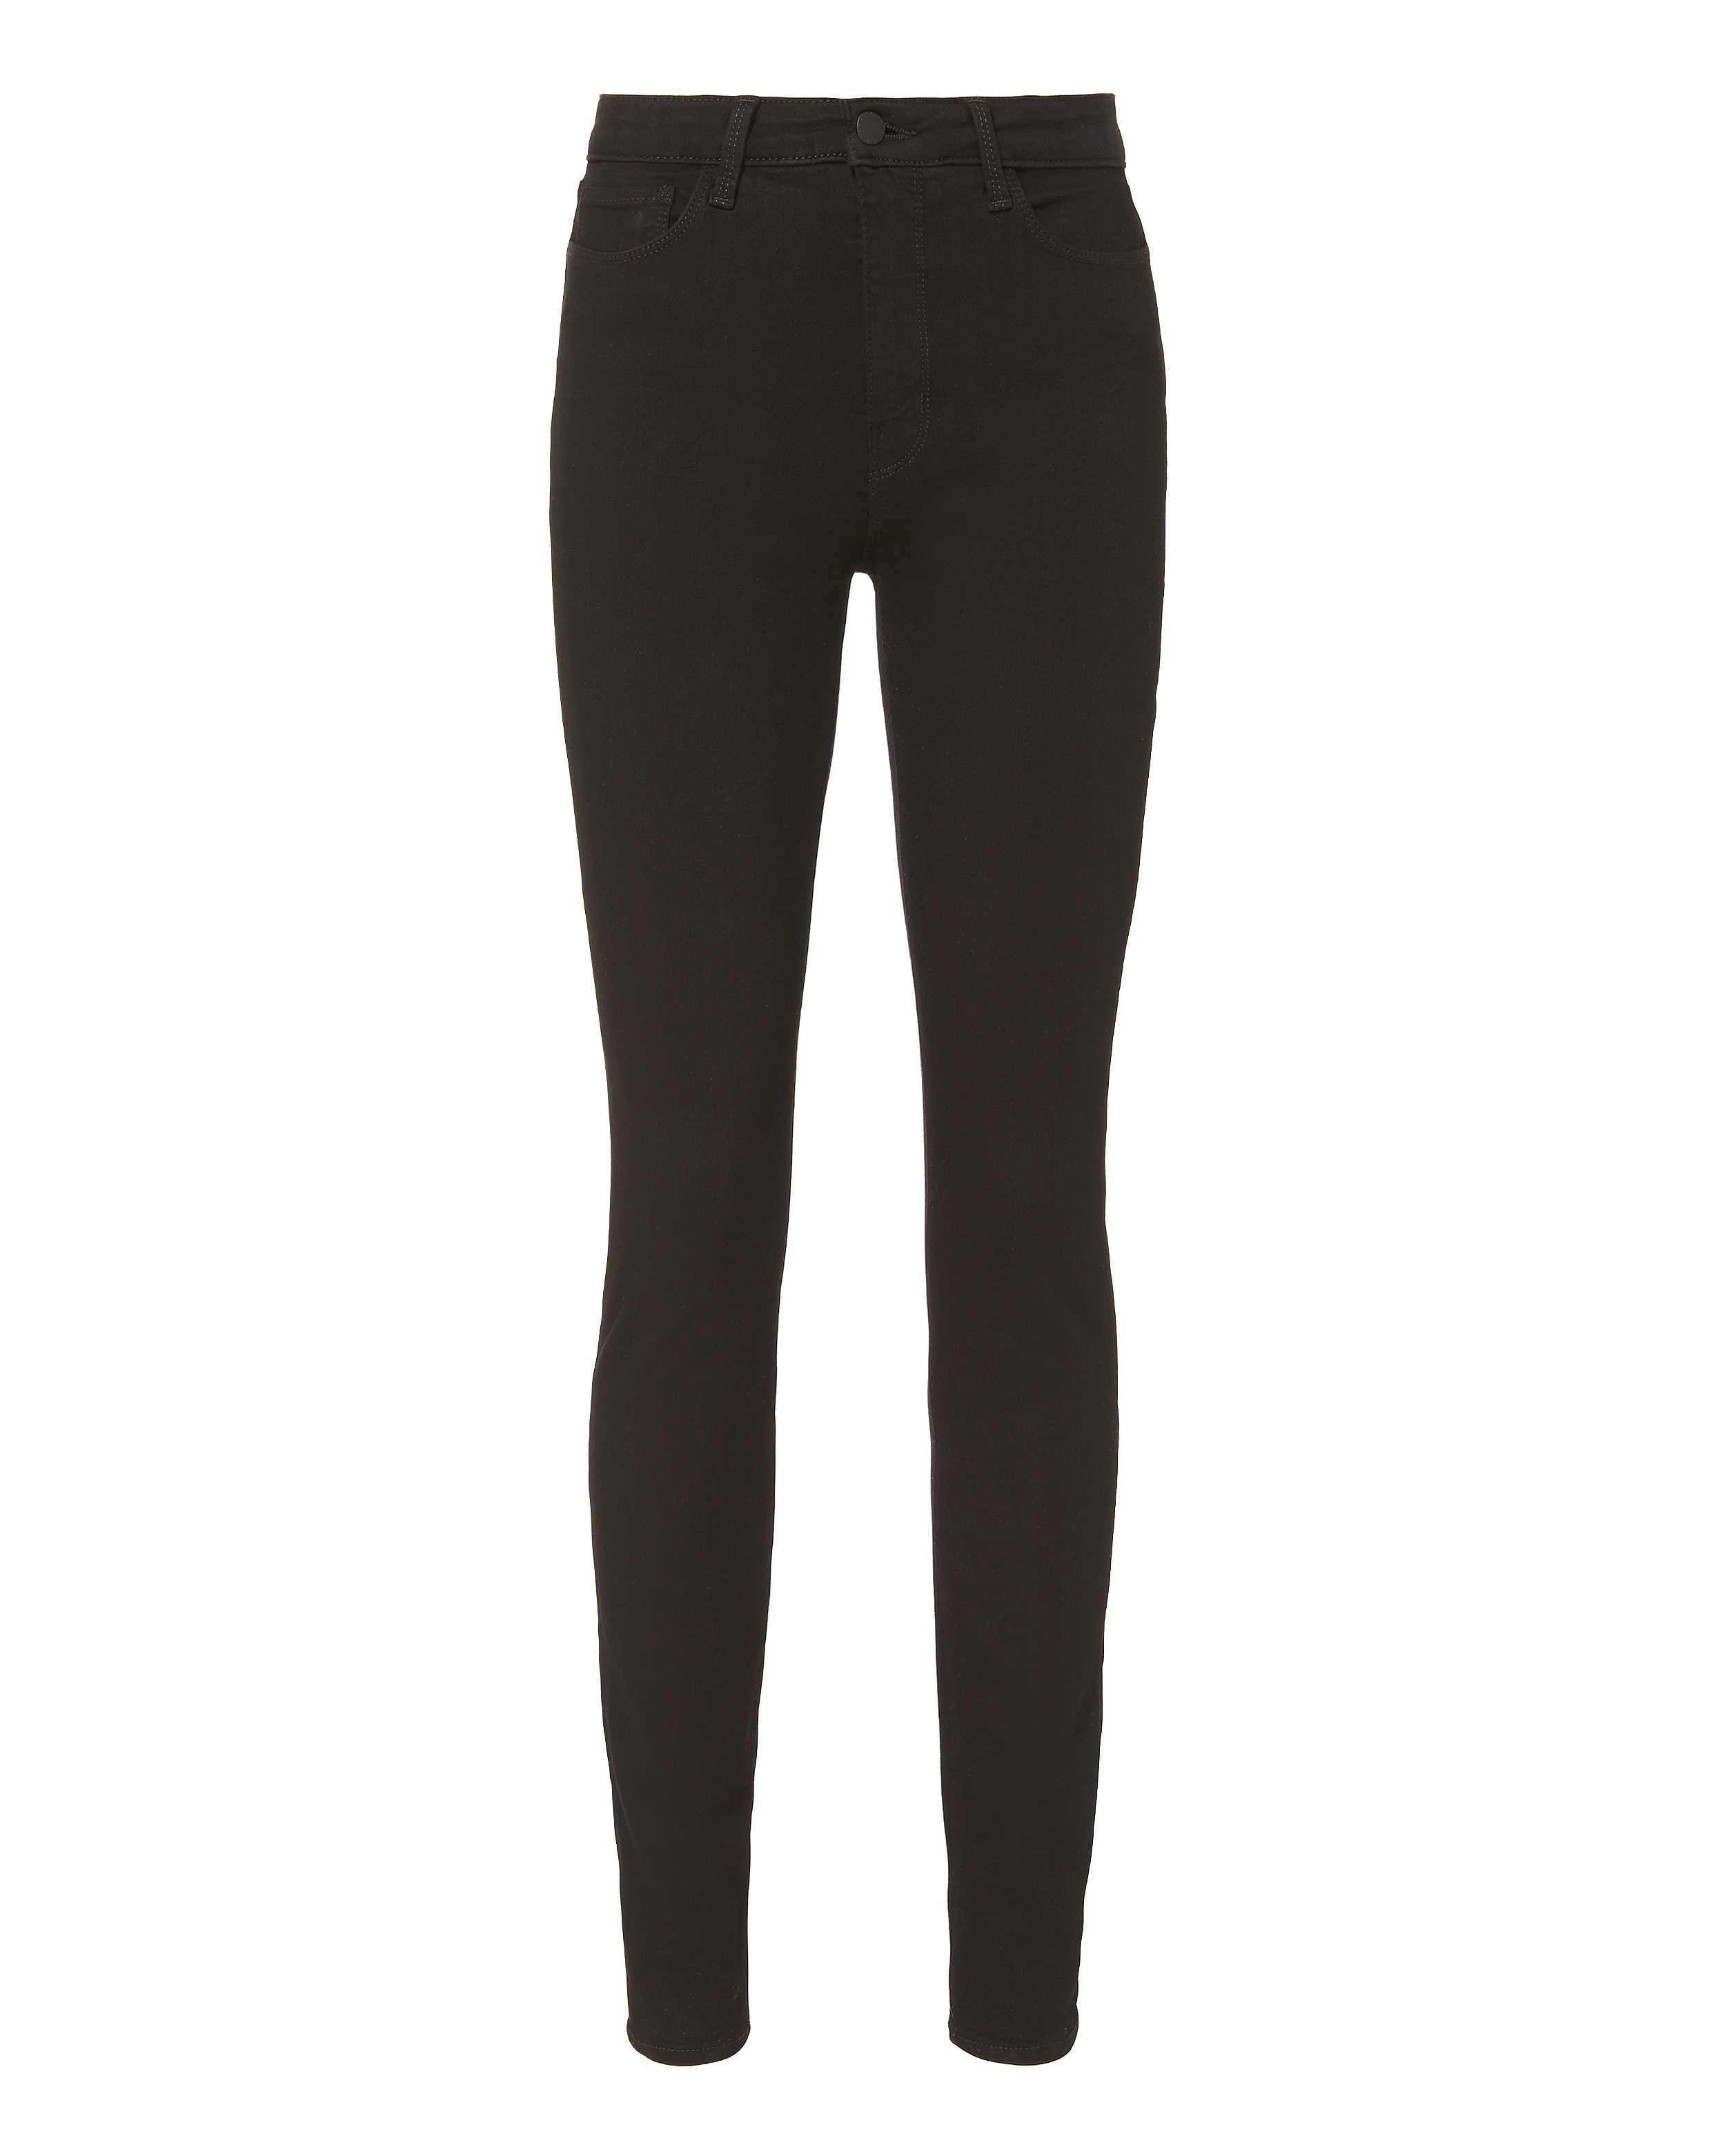 L AGENCE MARGUERITE HIGH-RISE SKINNY JEANS,088883215193